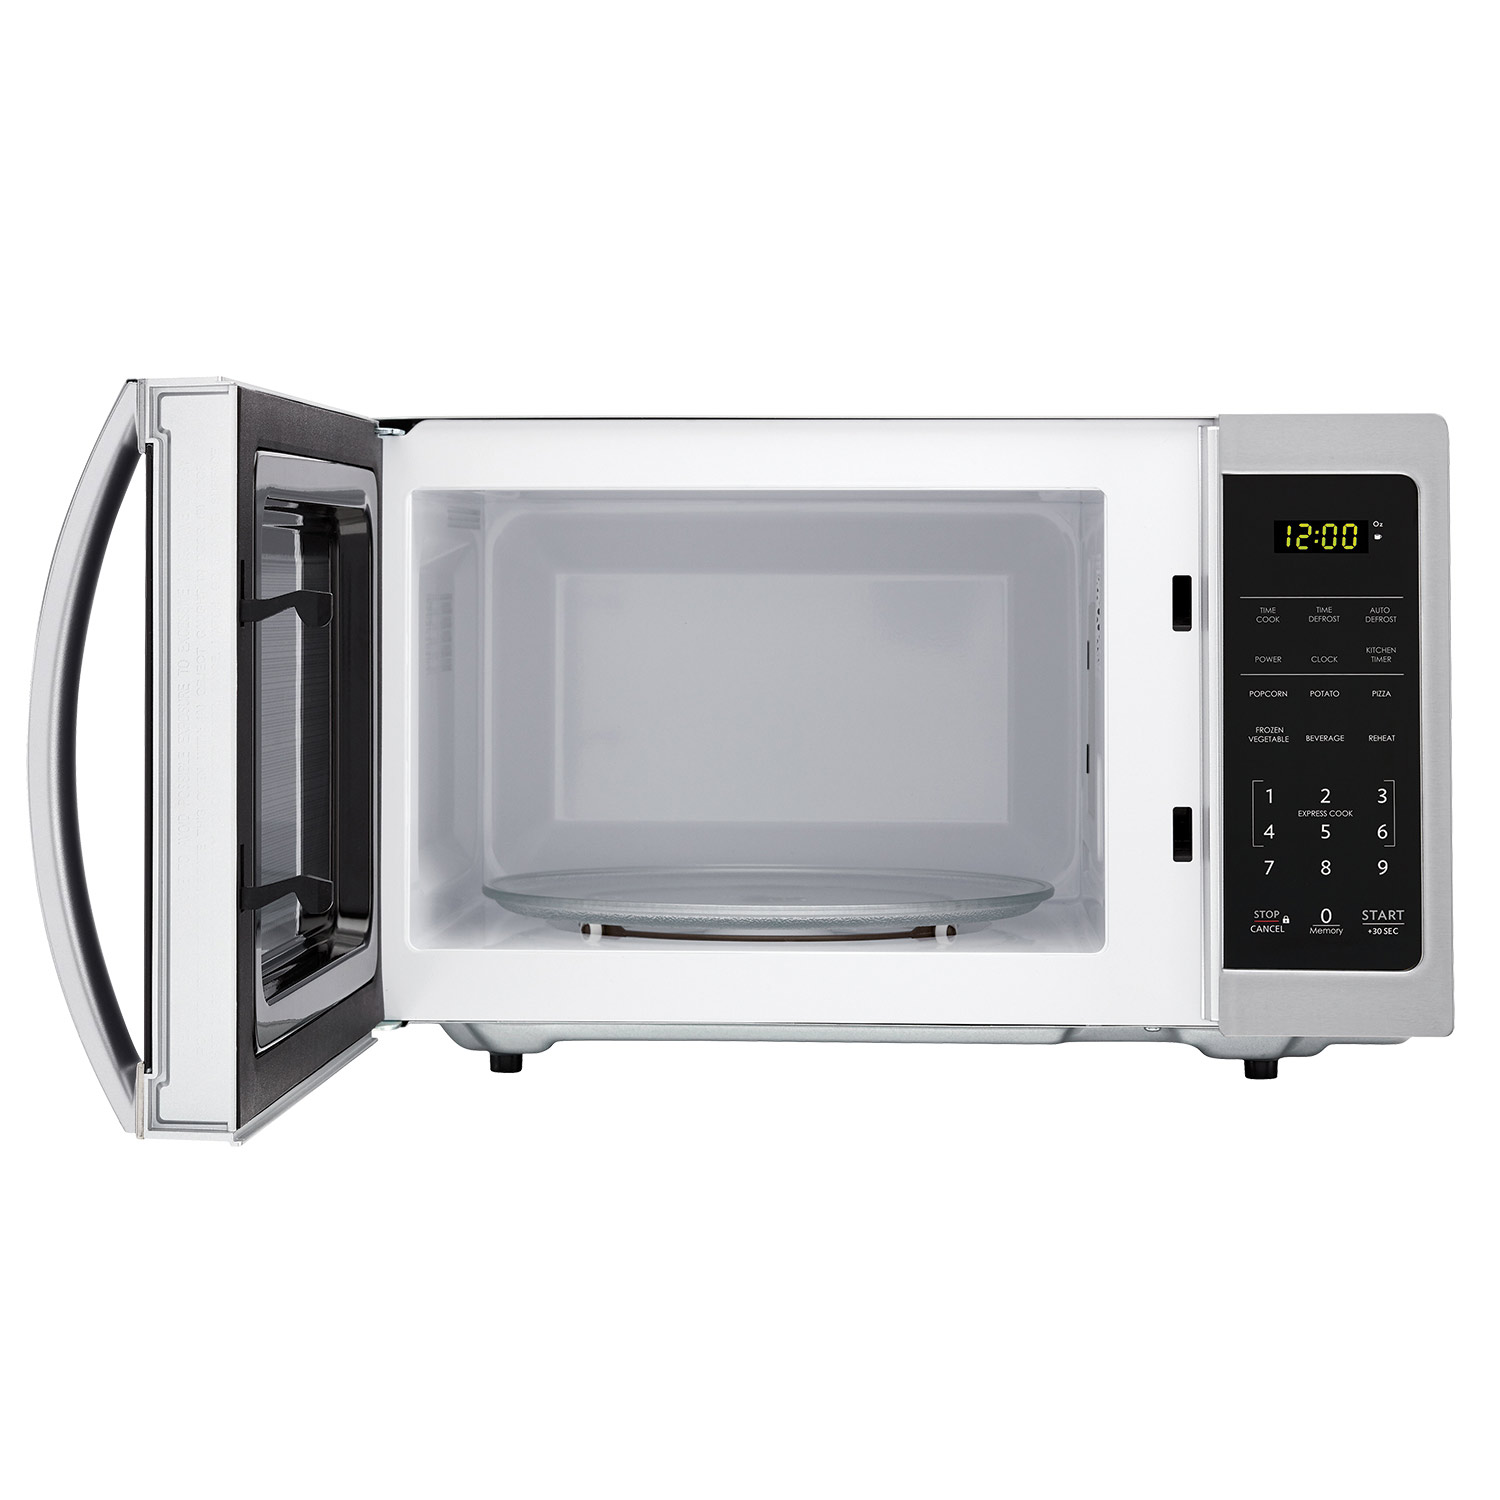 Tundra MW Series - 120 Volt Truck Microwave Oven - 0.7 ft